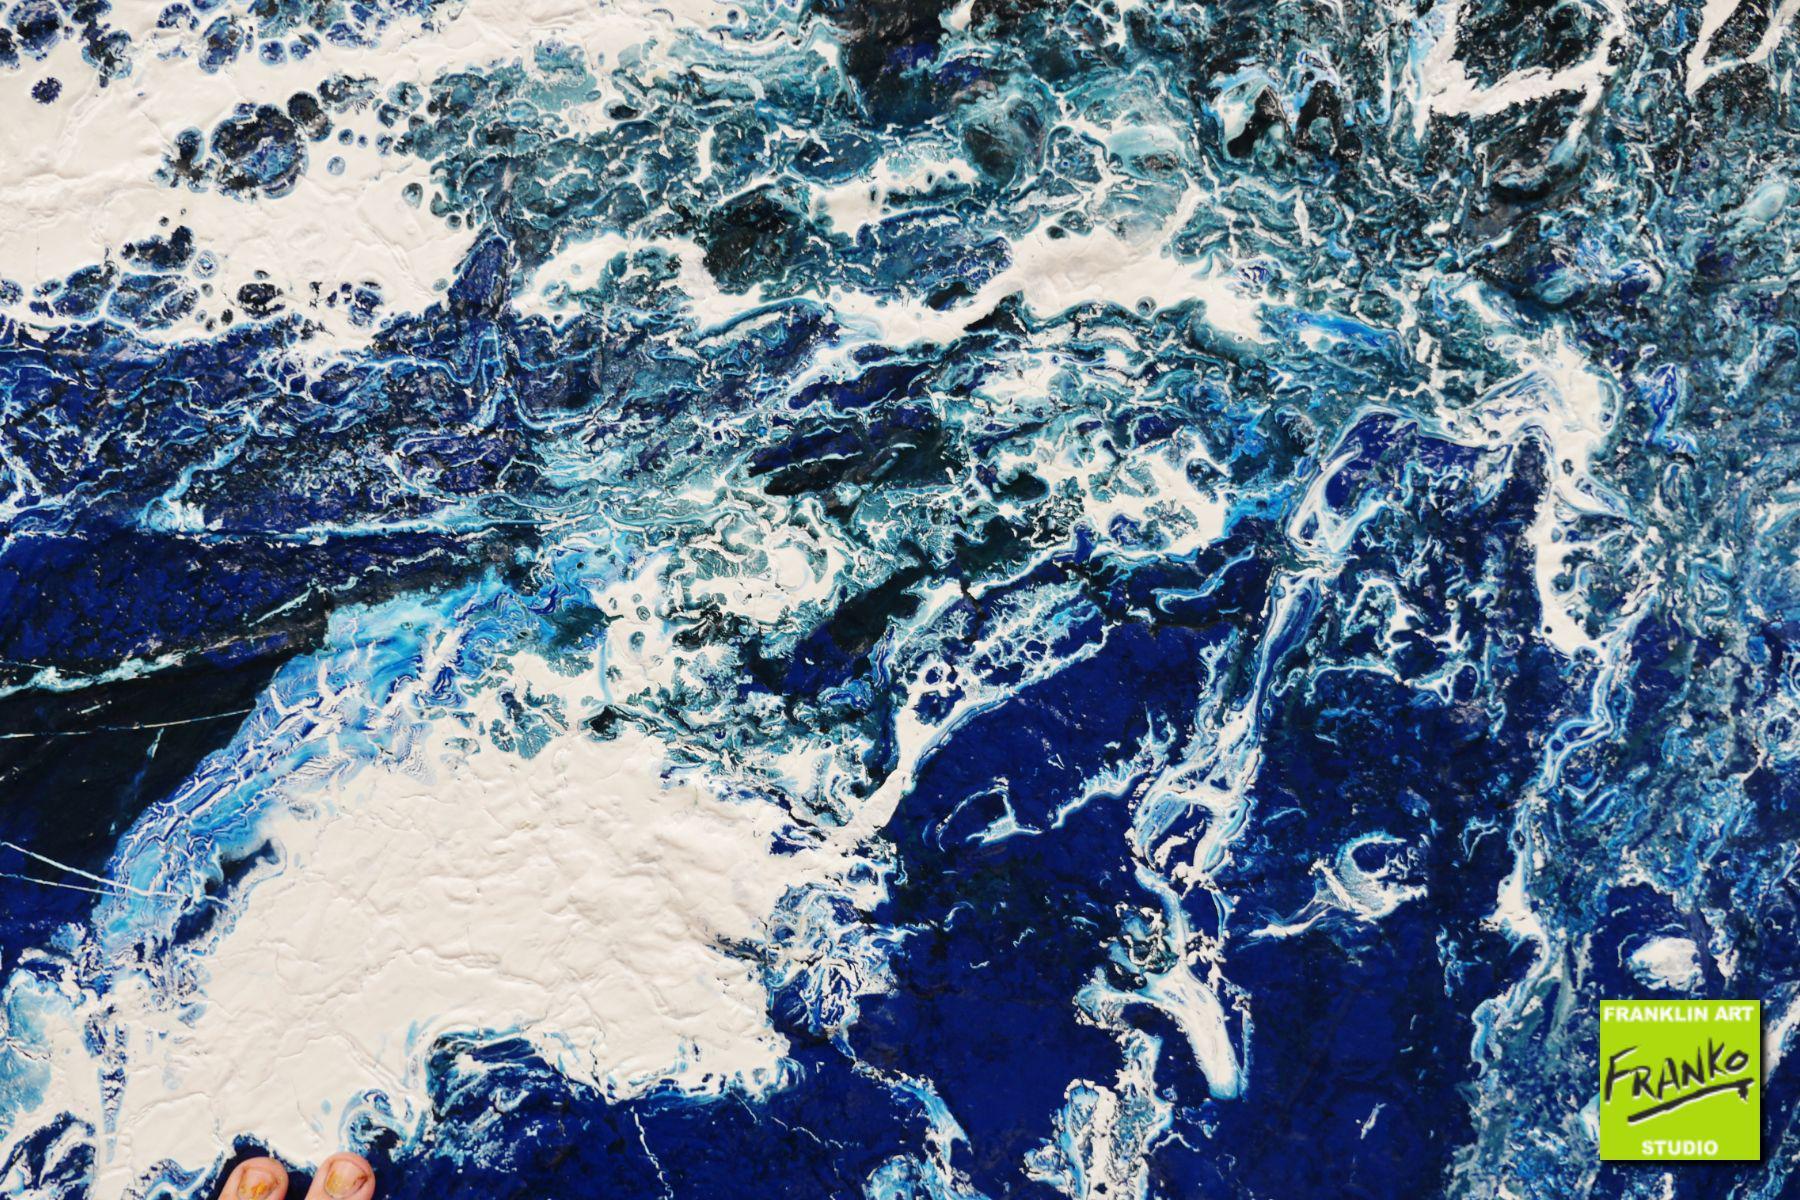 Blu Drift 190cm x 100cm White Blue Textured Abstract Painting (SOLD)